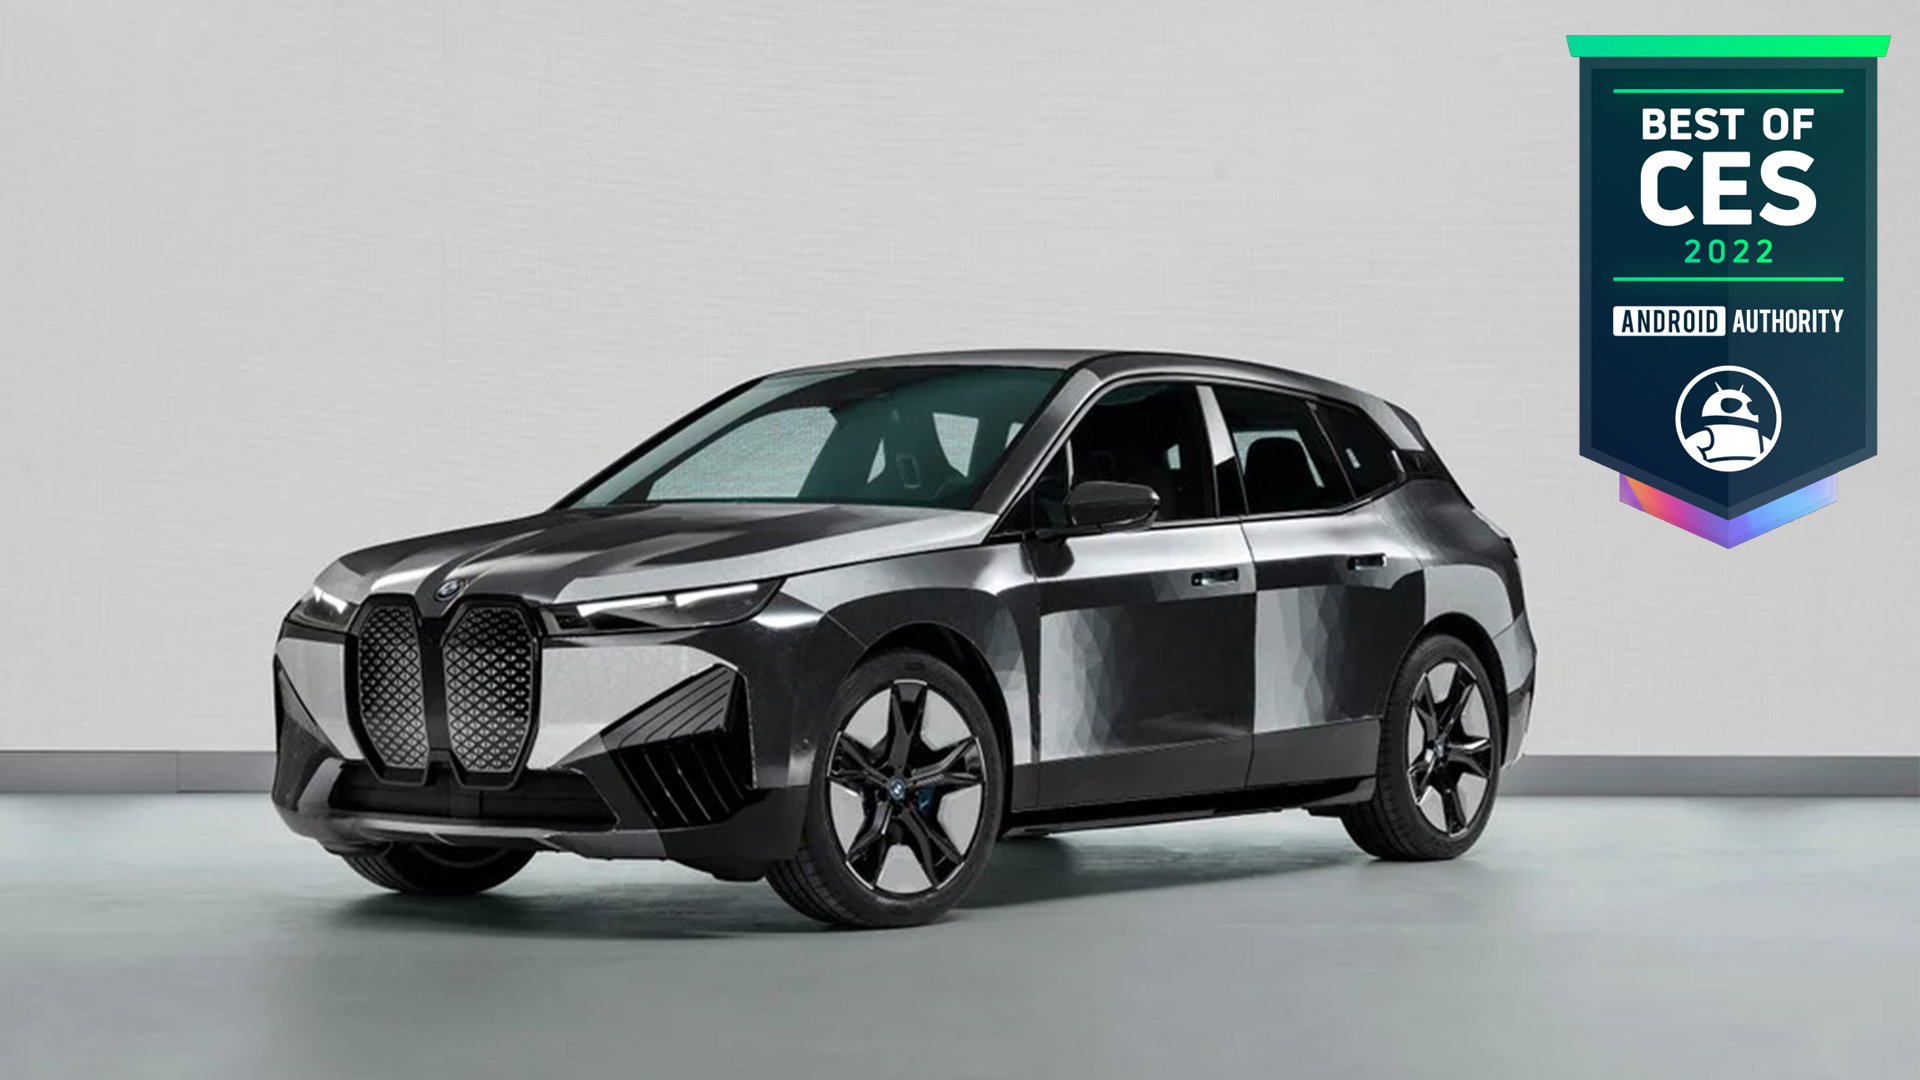 BMW iX Flow Android Authority Best of CES 2022 Award winner